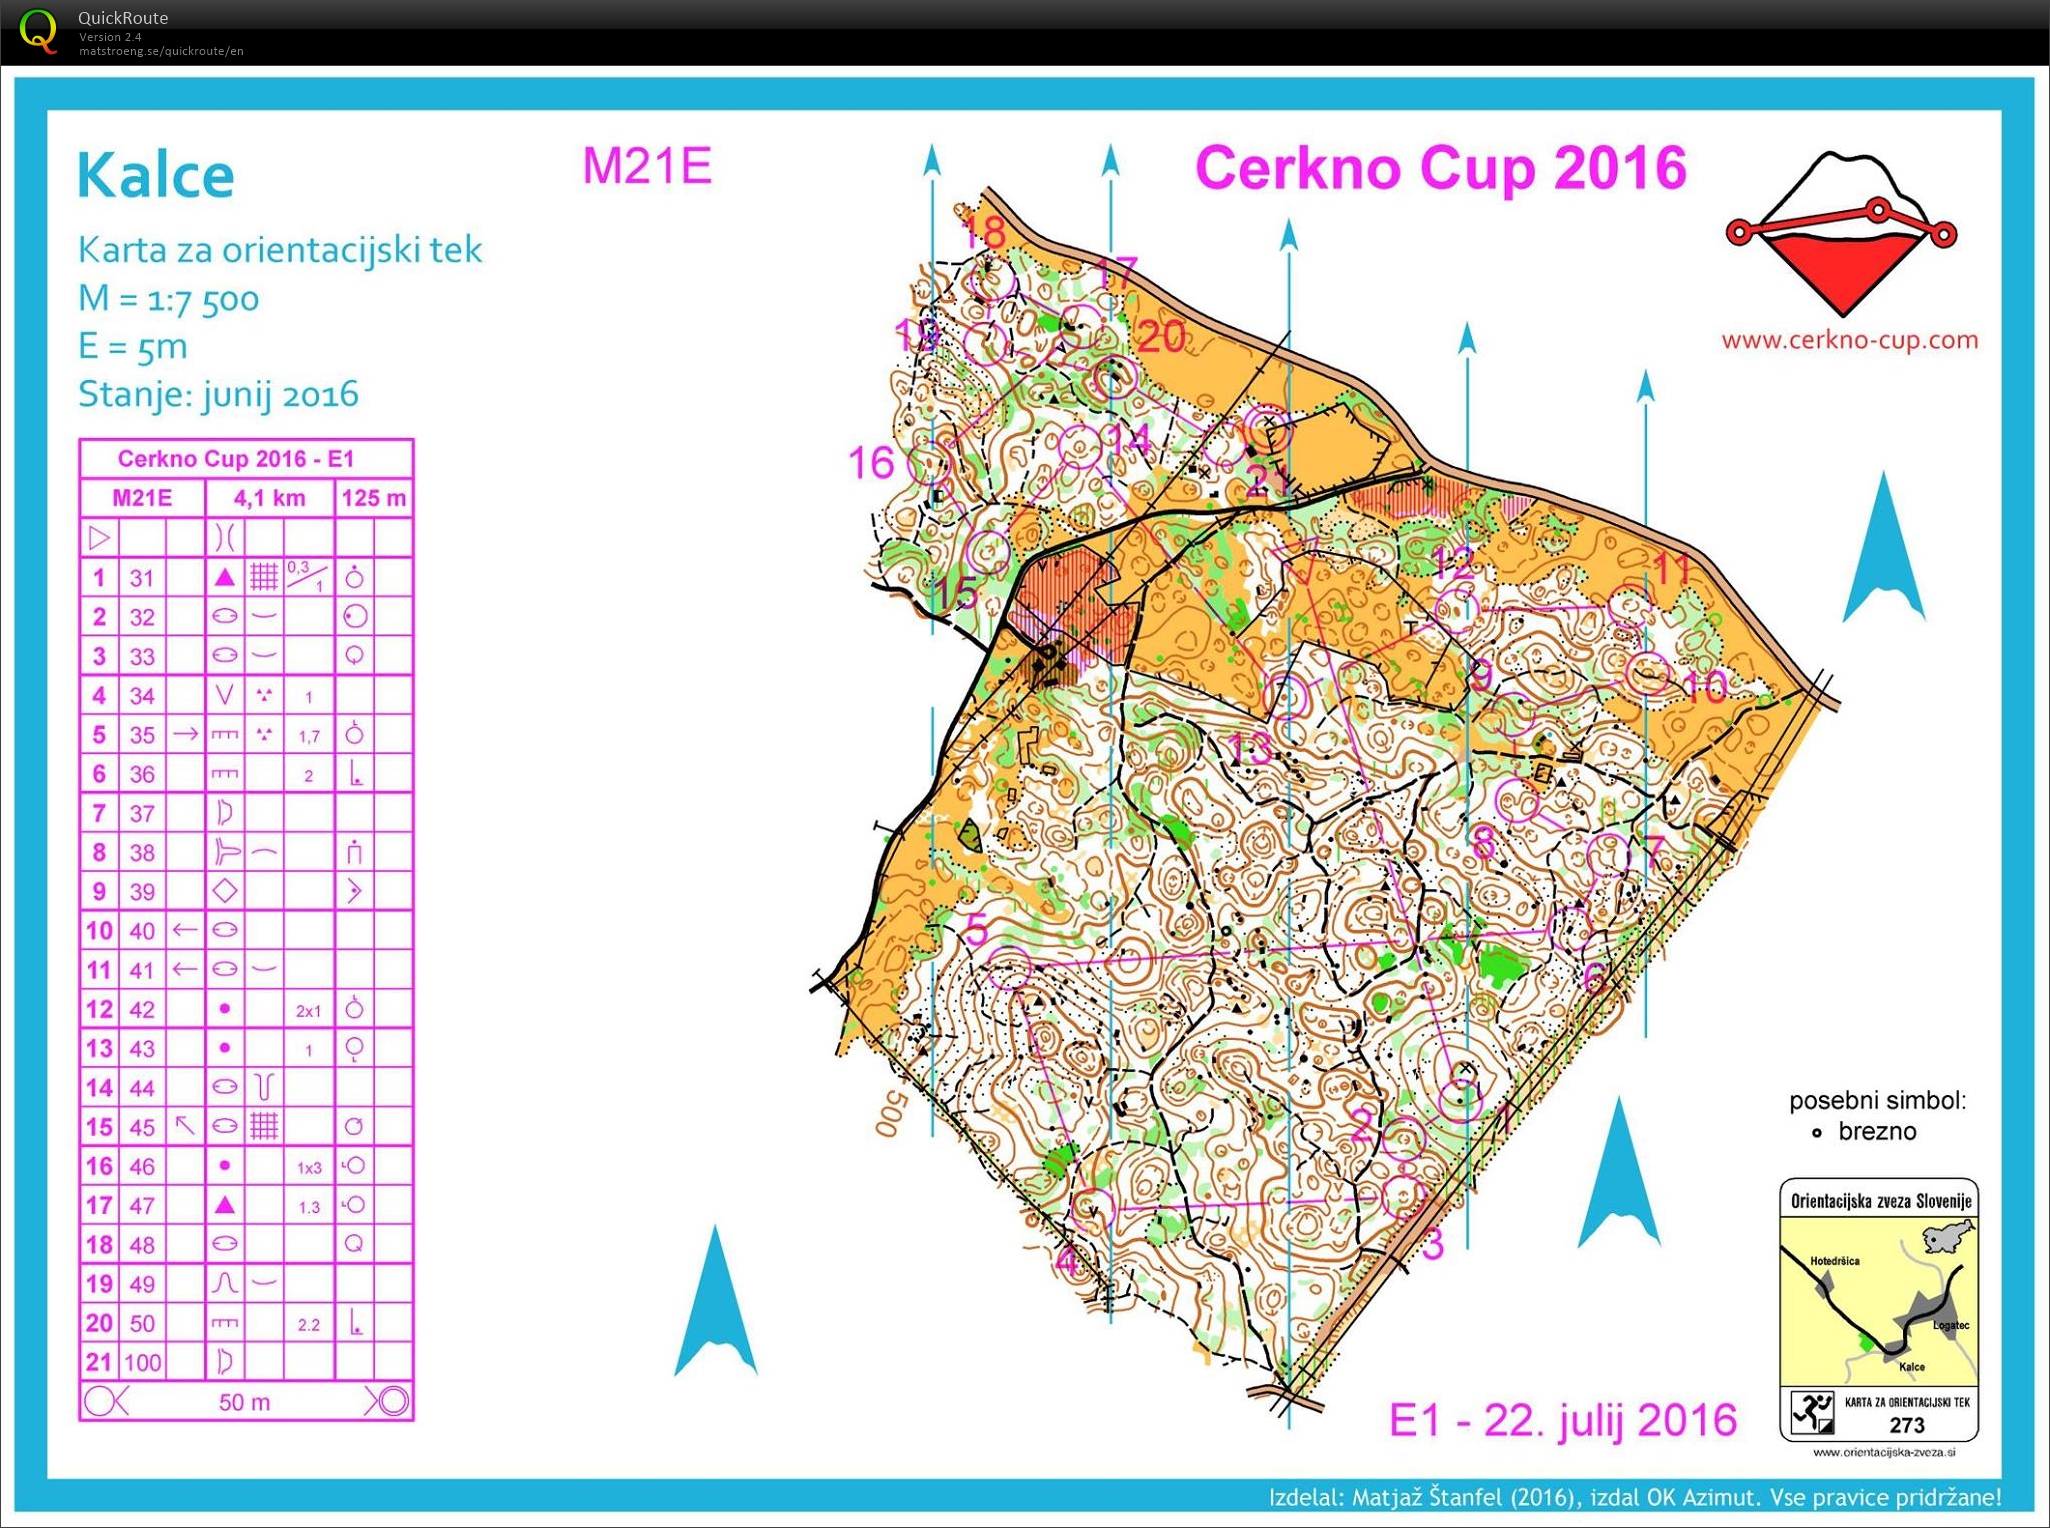 Cerkno Cup stage 1 (22/07/2016)